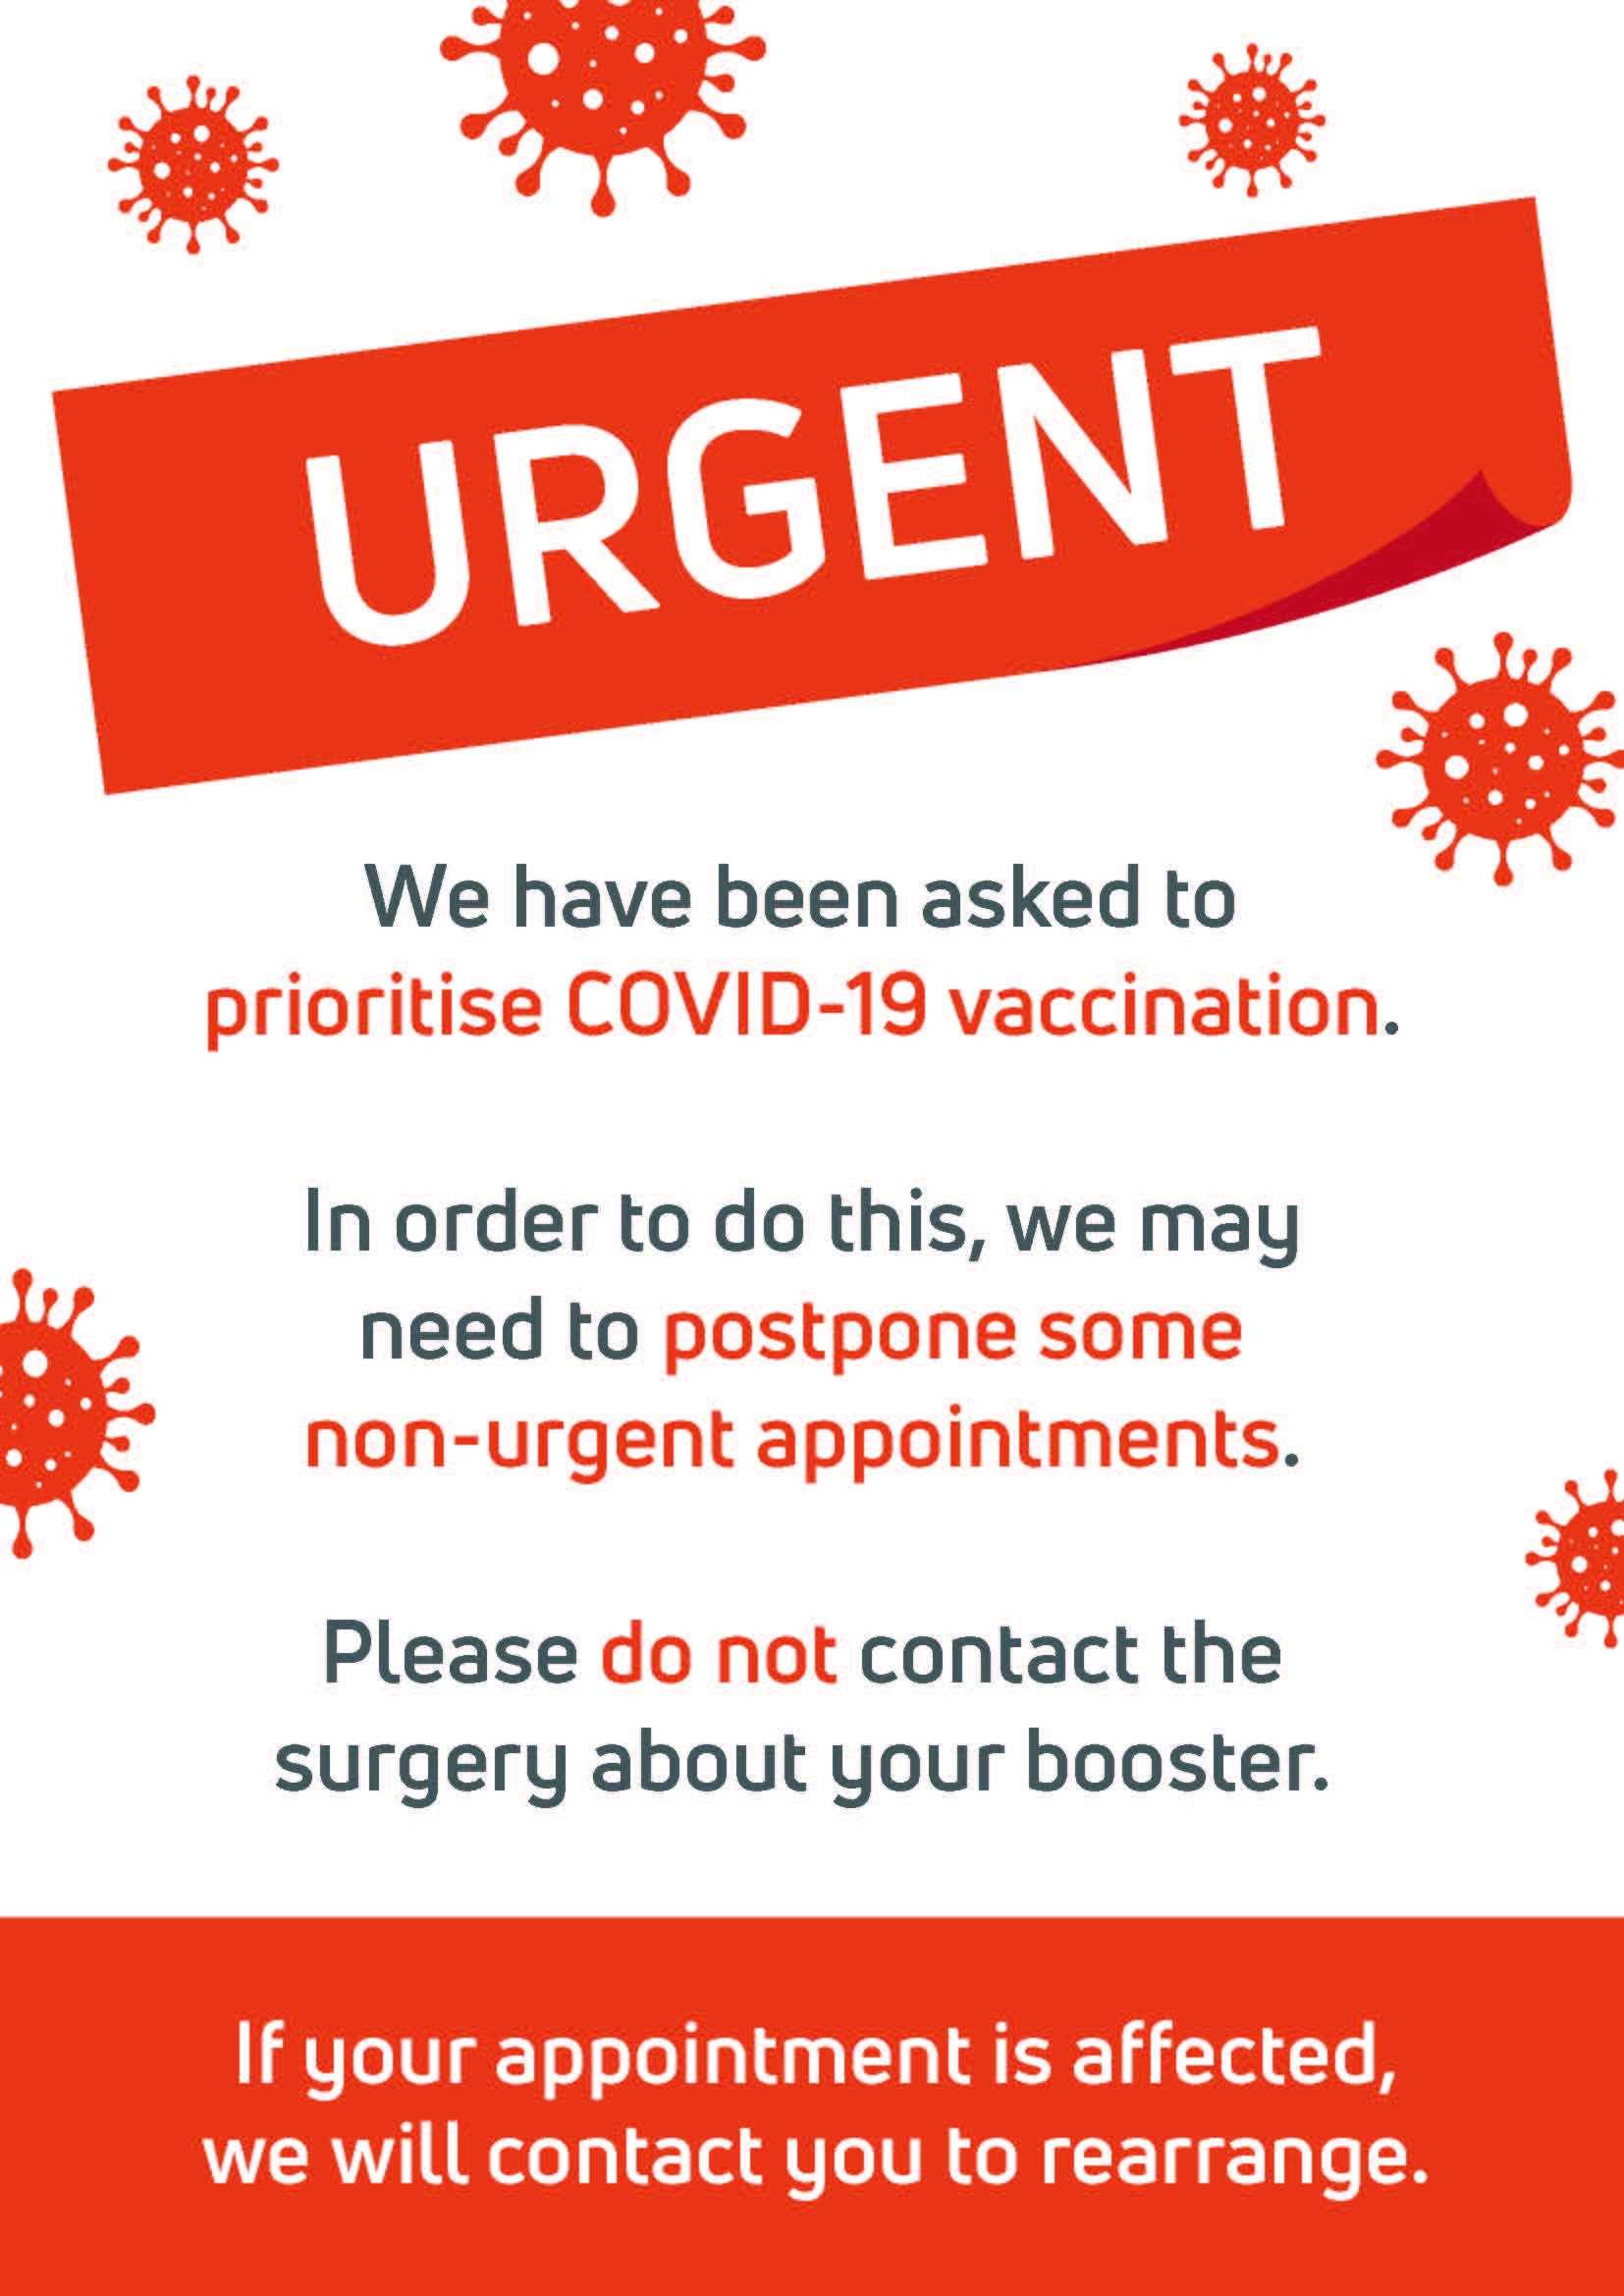 We have been asked to prioritise COVID-19 vaccination. In order to do this, we may need to postpone some non-urgent appointments. Please do not contact the surgery about your booster. If your appointment is affected, we will contact you to rearrange.